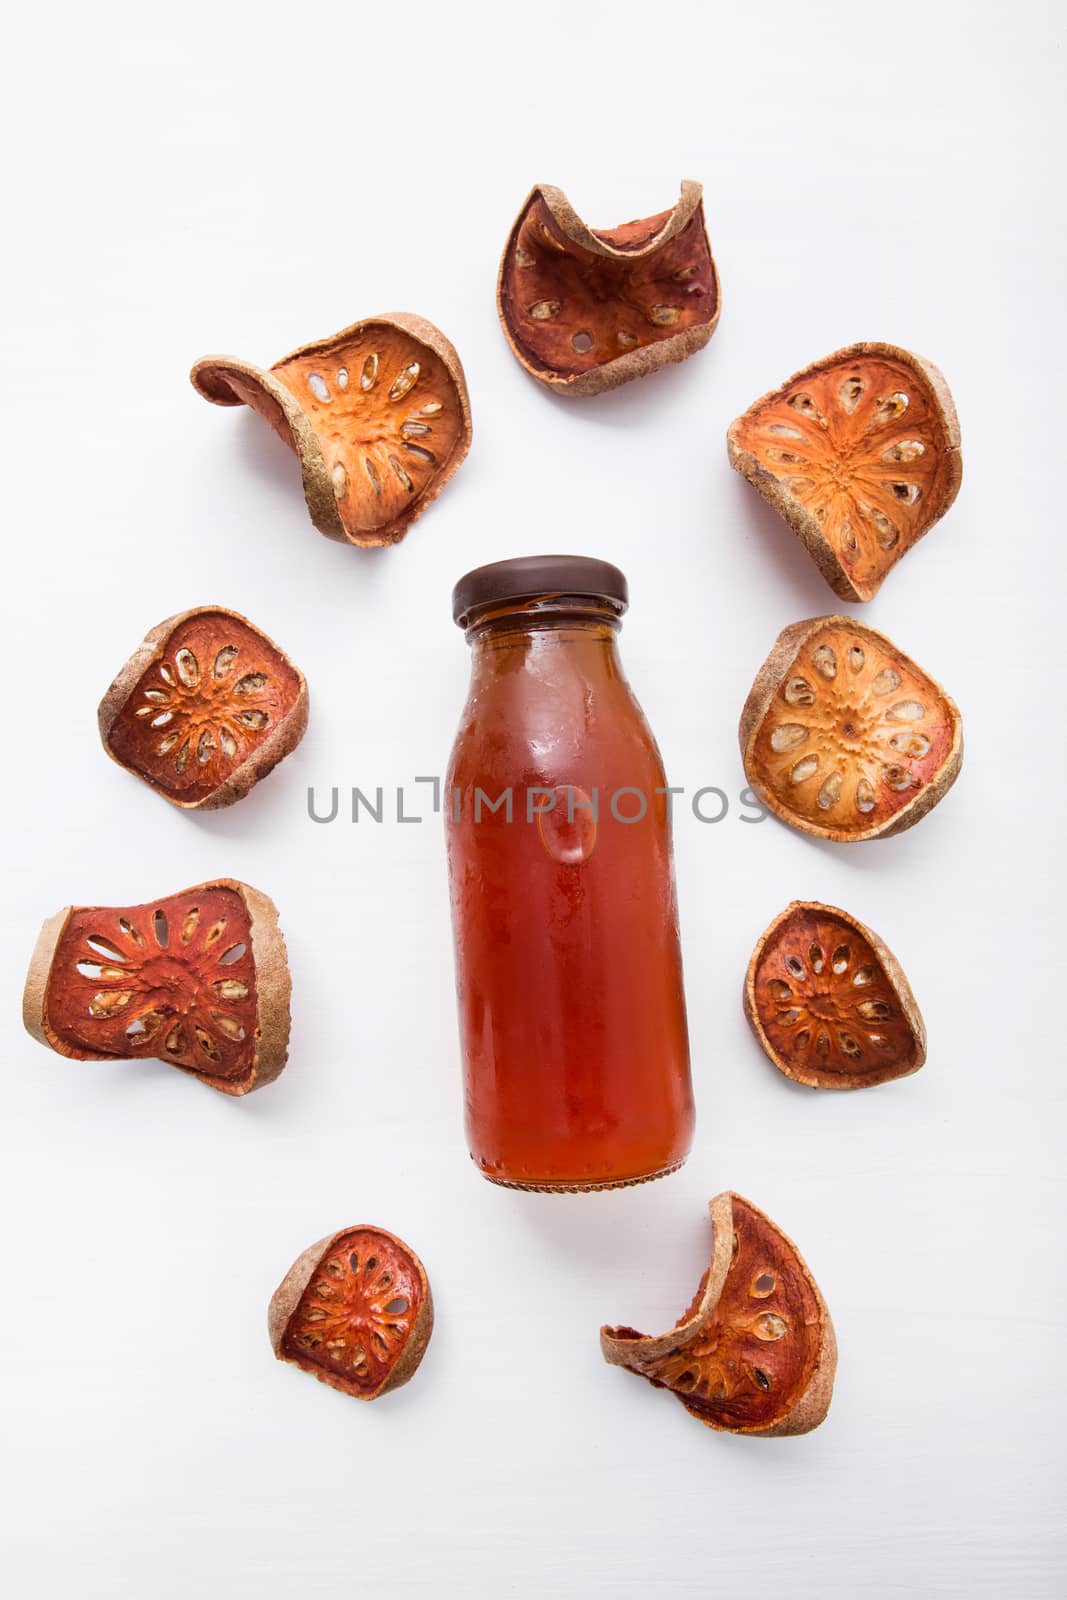 Bael dried and bael juices on white wooden background. by Bowonpat